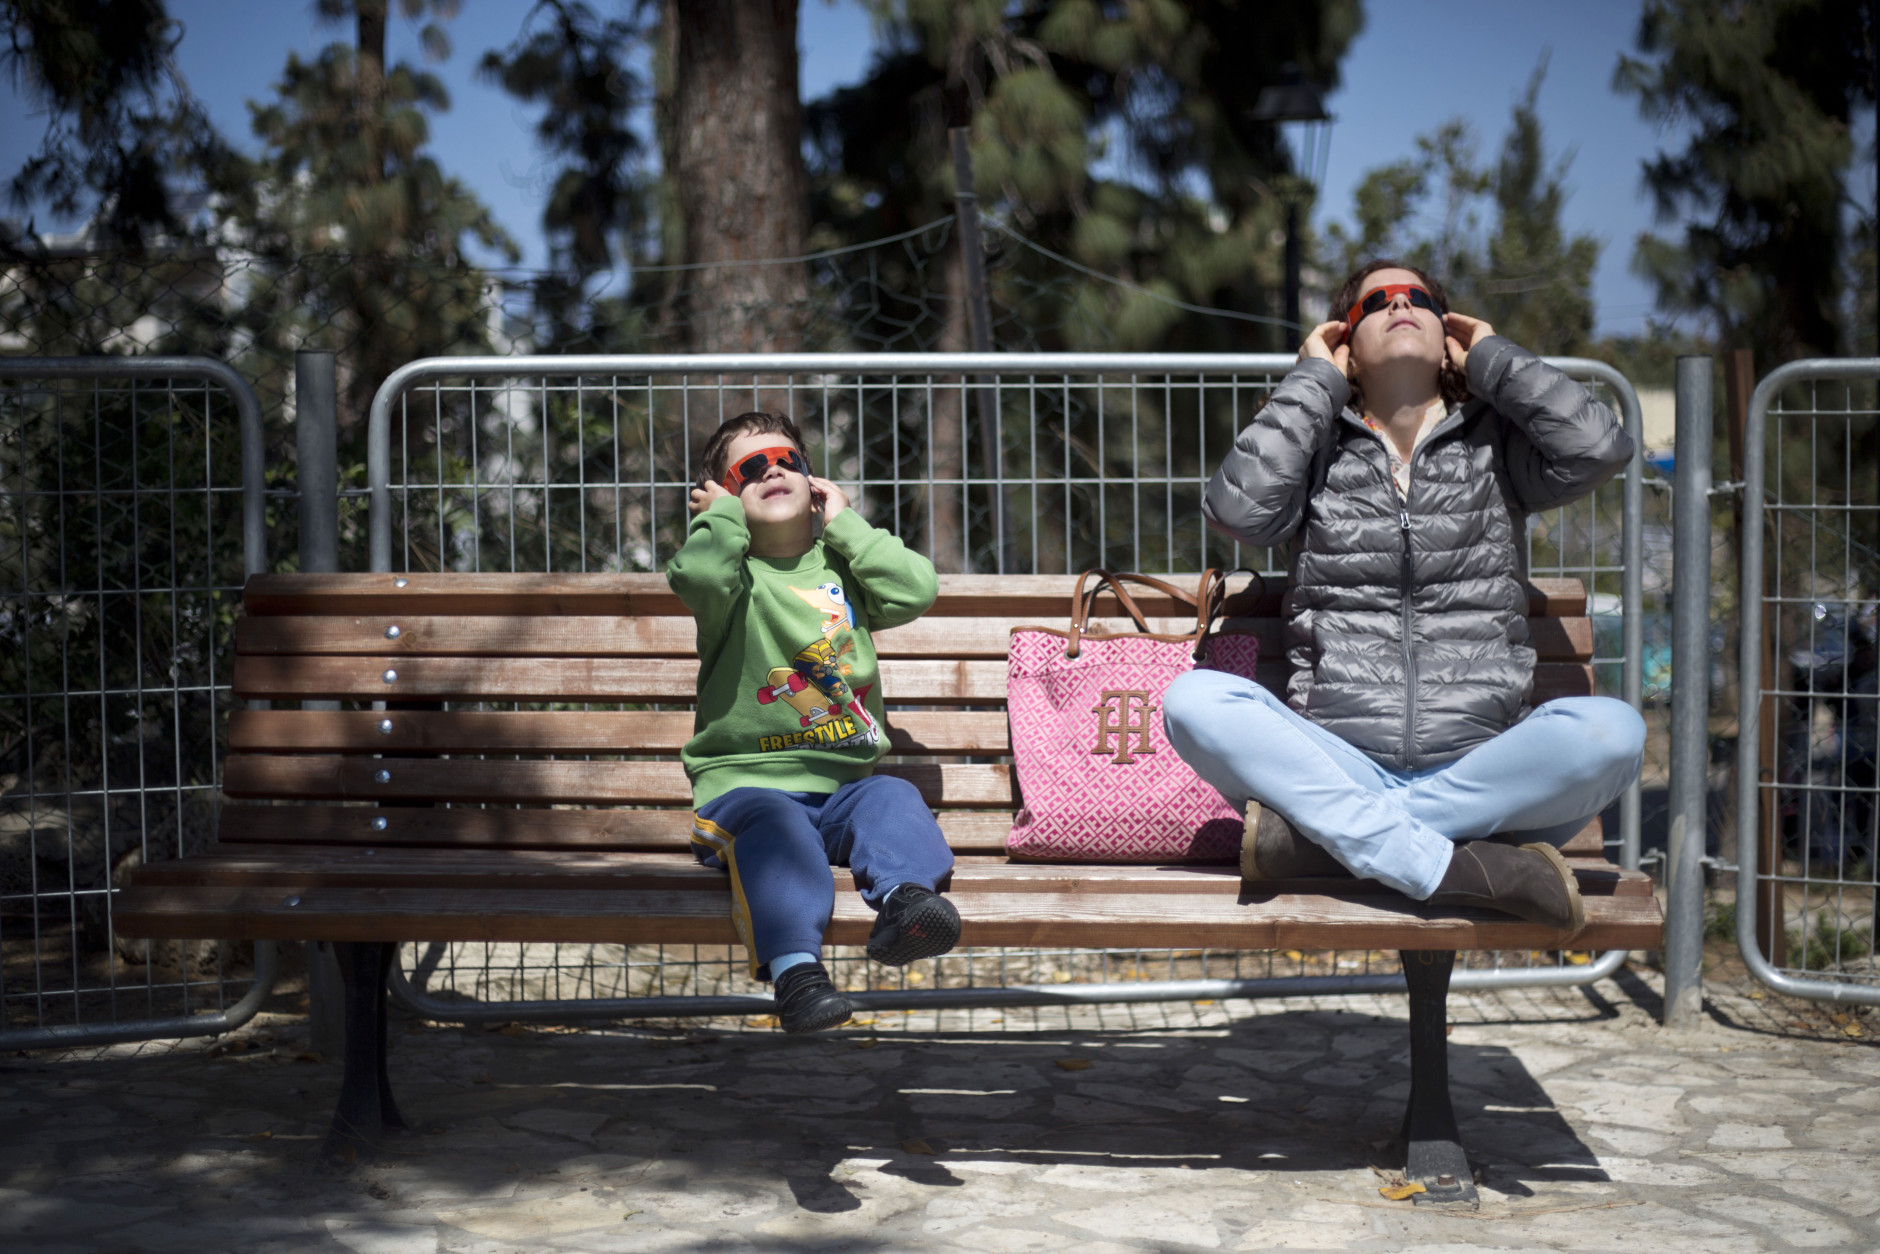 FILE - In this Friday, March 20, 2015 file photo, an Israeli mother and son look up at the sun wearing protective goggles to watch a partial solar eclipse in the town of Givatayim, near Tel Aviv, Israel. The partial eclipse was visible across Europe and parts of Asia and Africa, while sky-gazers in the Arctic were treated to a perfect view of a total solar eclipse as the moon completely blocked out the sun in a clear sky. (AP Photo/Ariel Schalit, File)